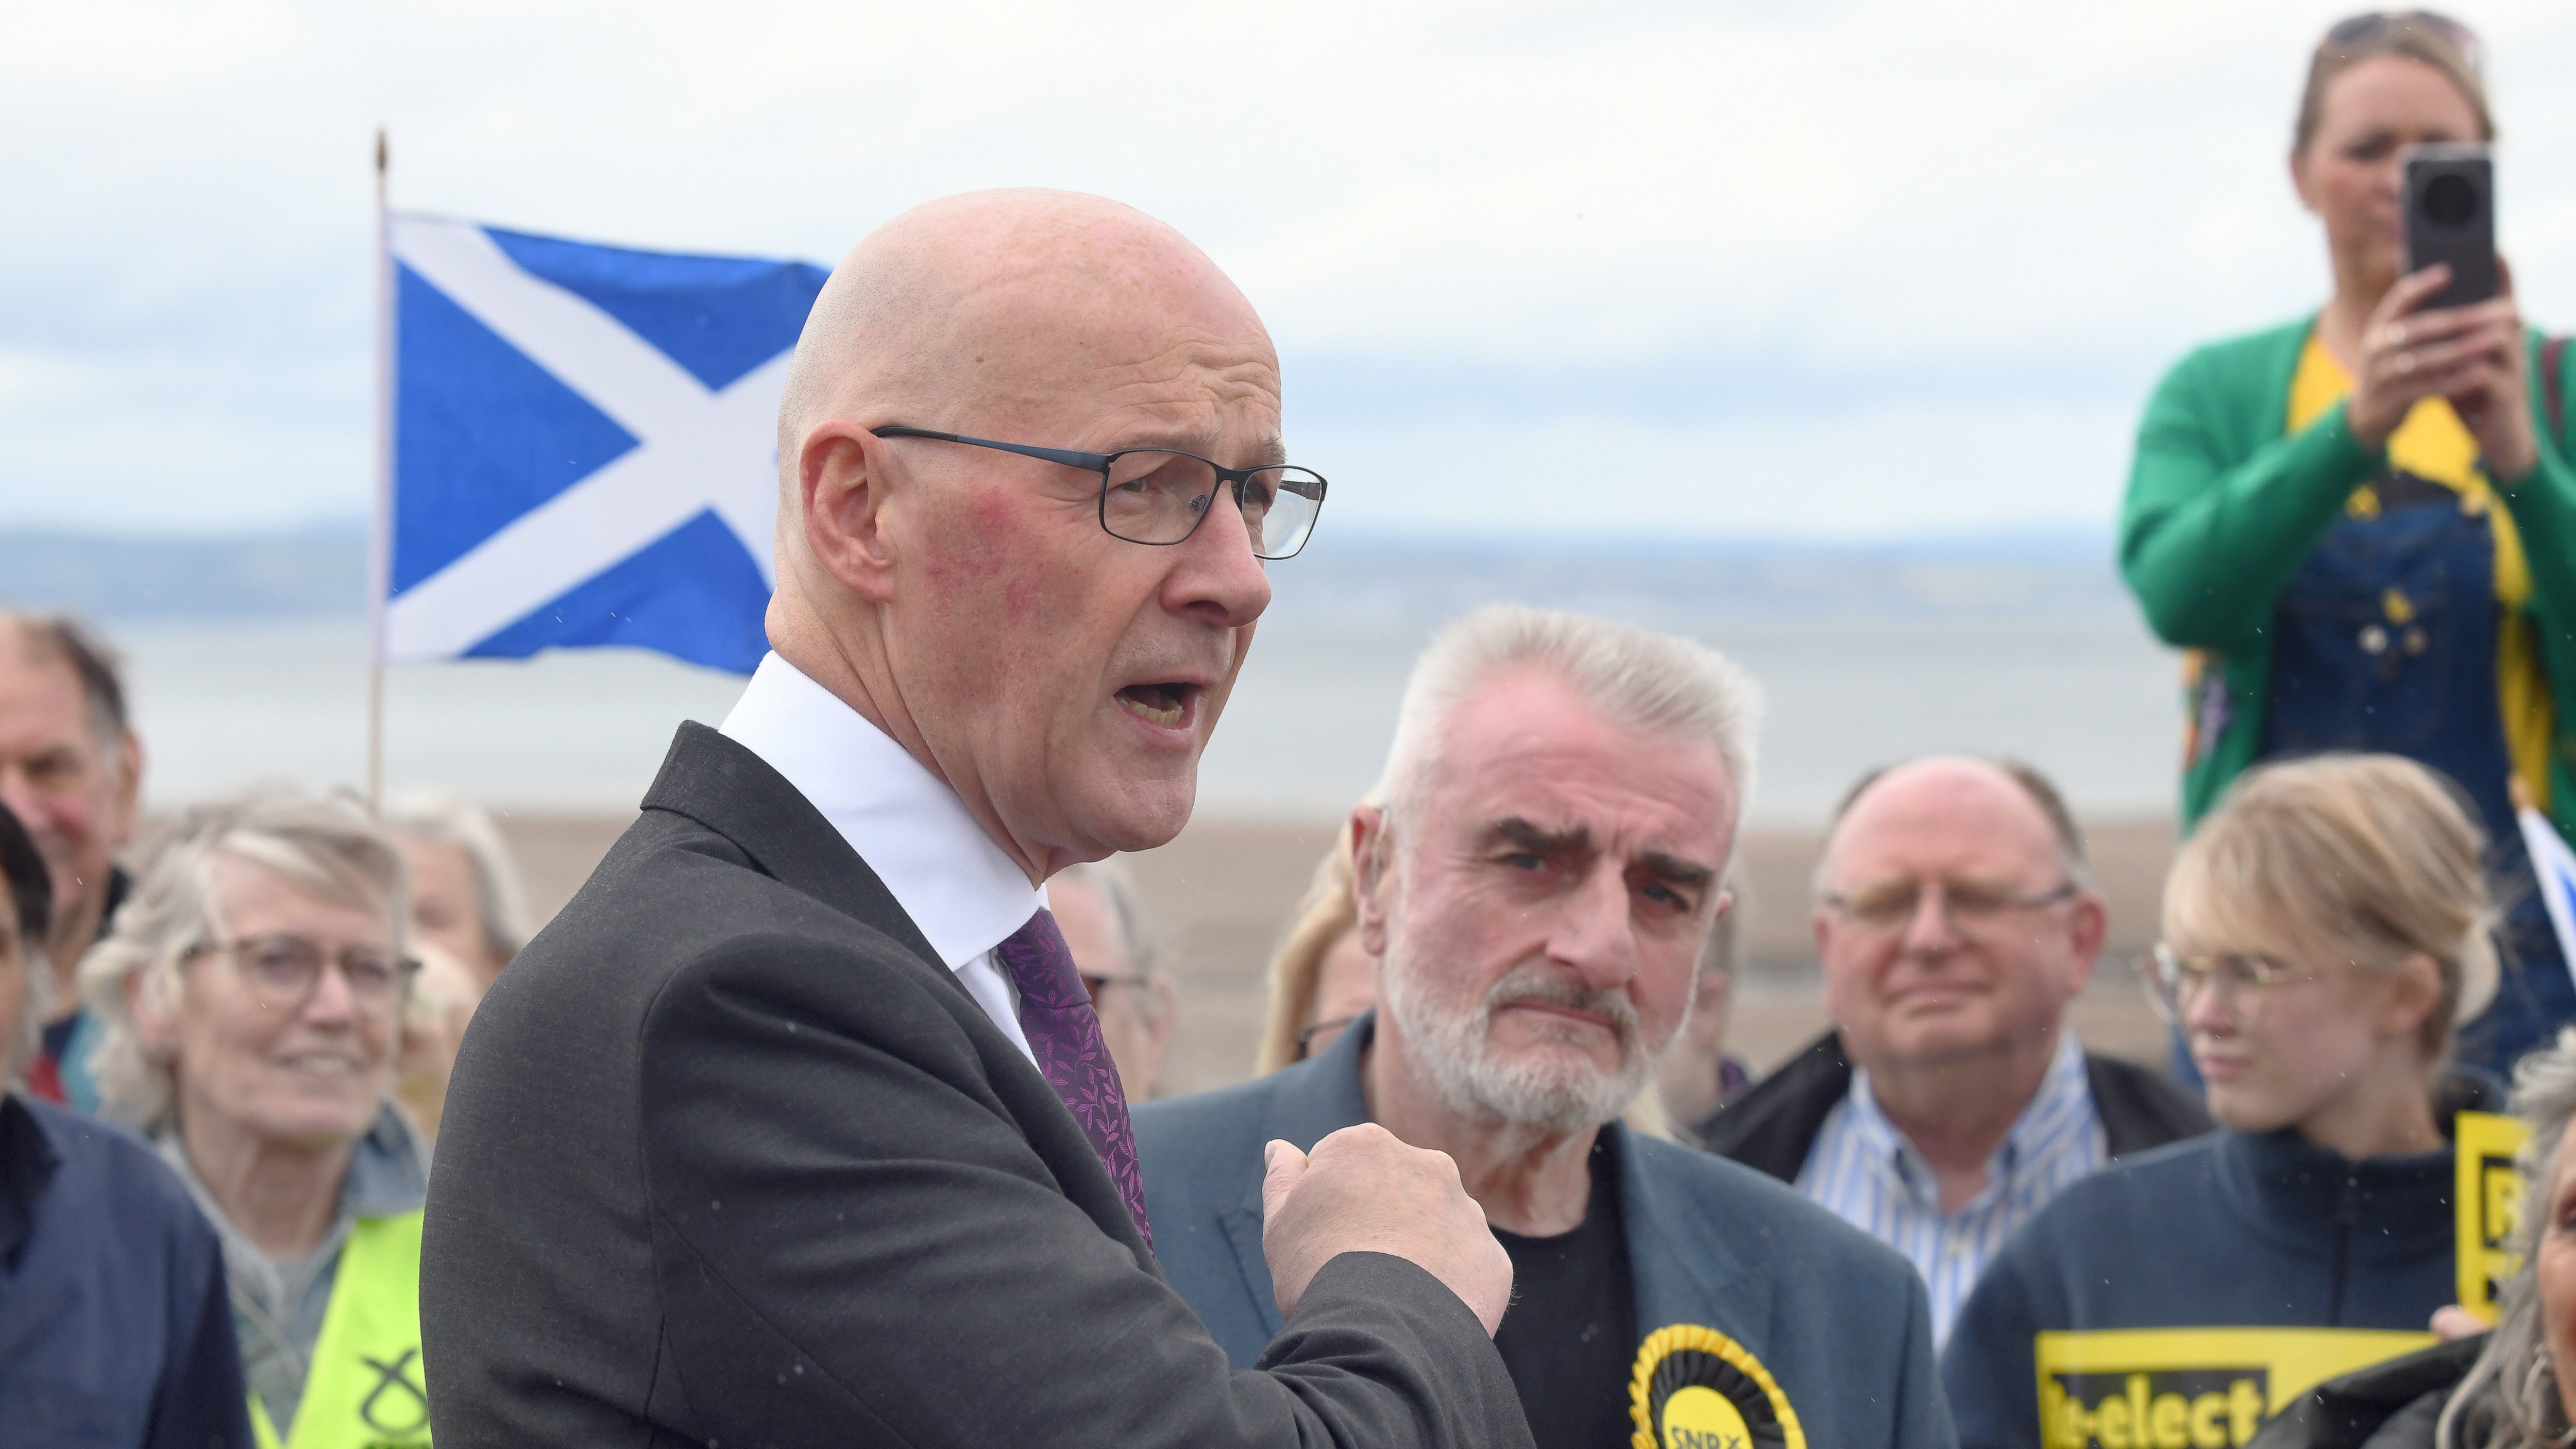 John Swinney has accused Alister Jack of ‘totally and utterly unethical’ behaviour by betting on the timing of the General Election